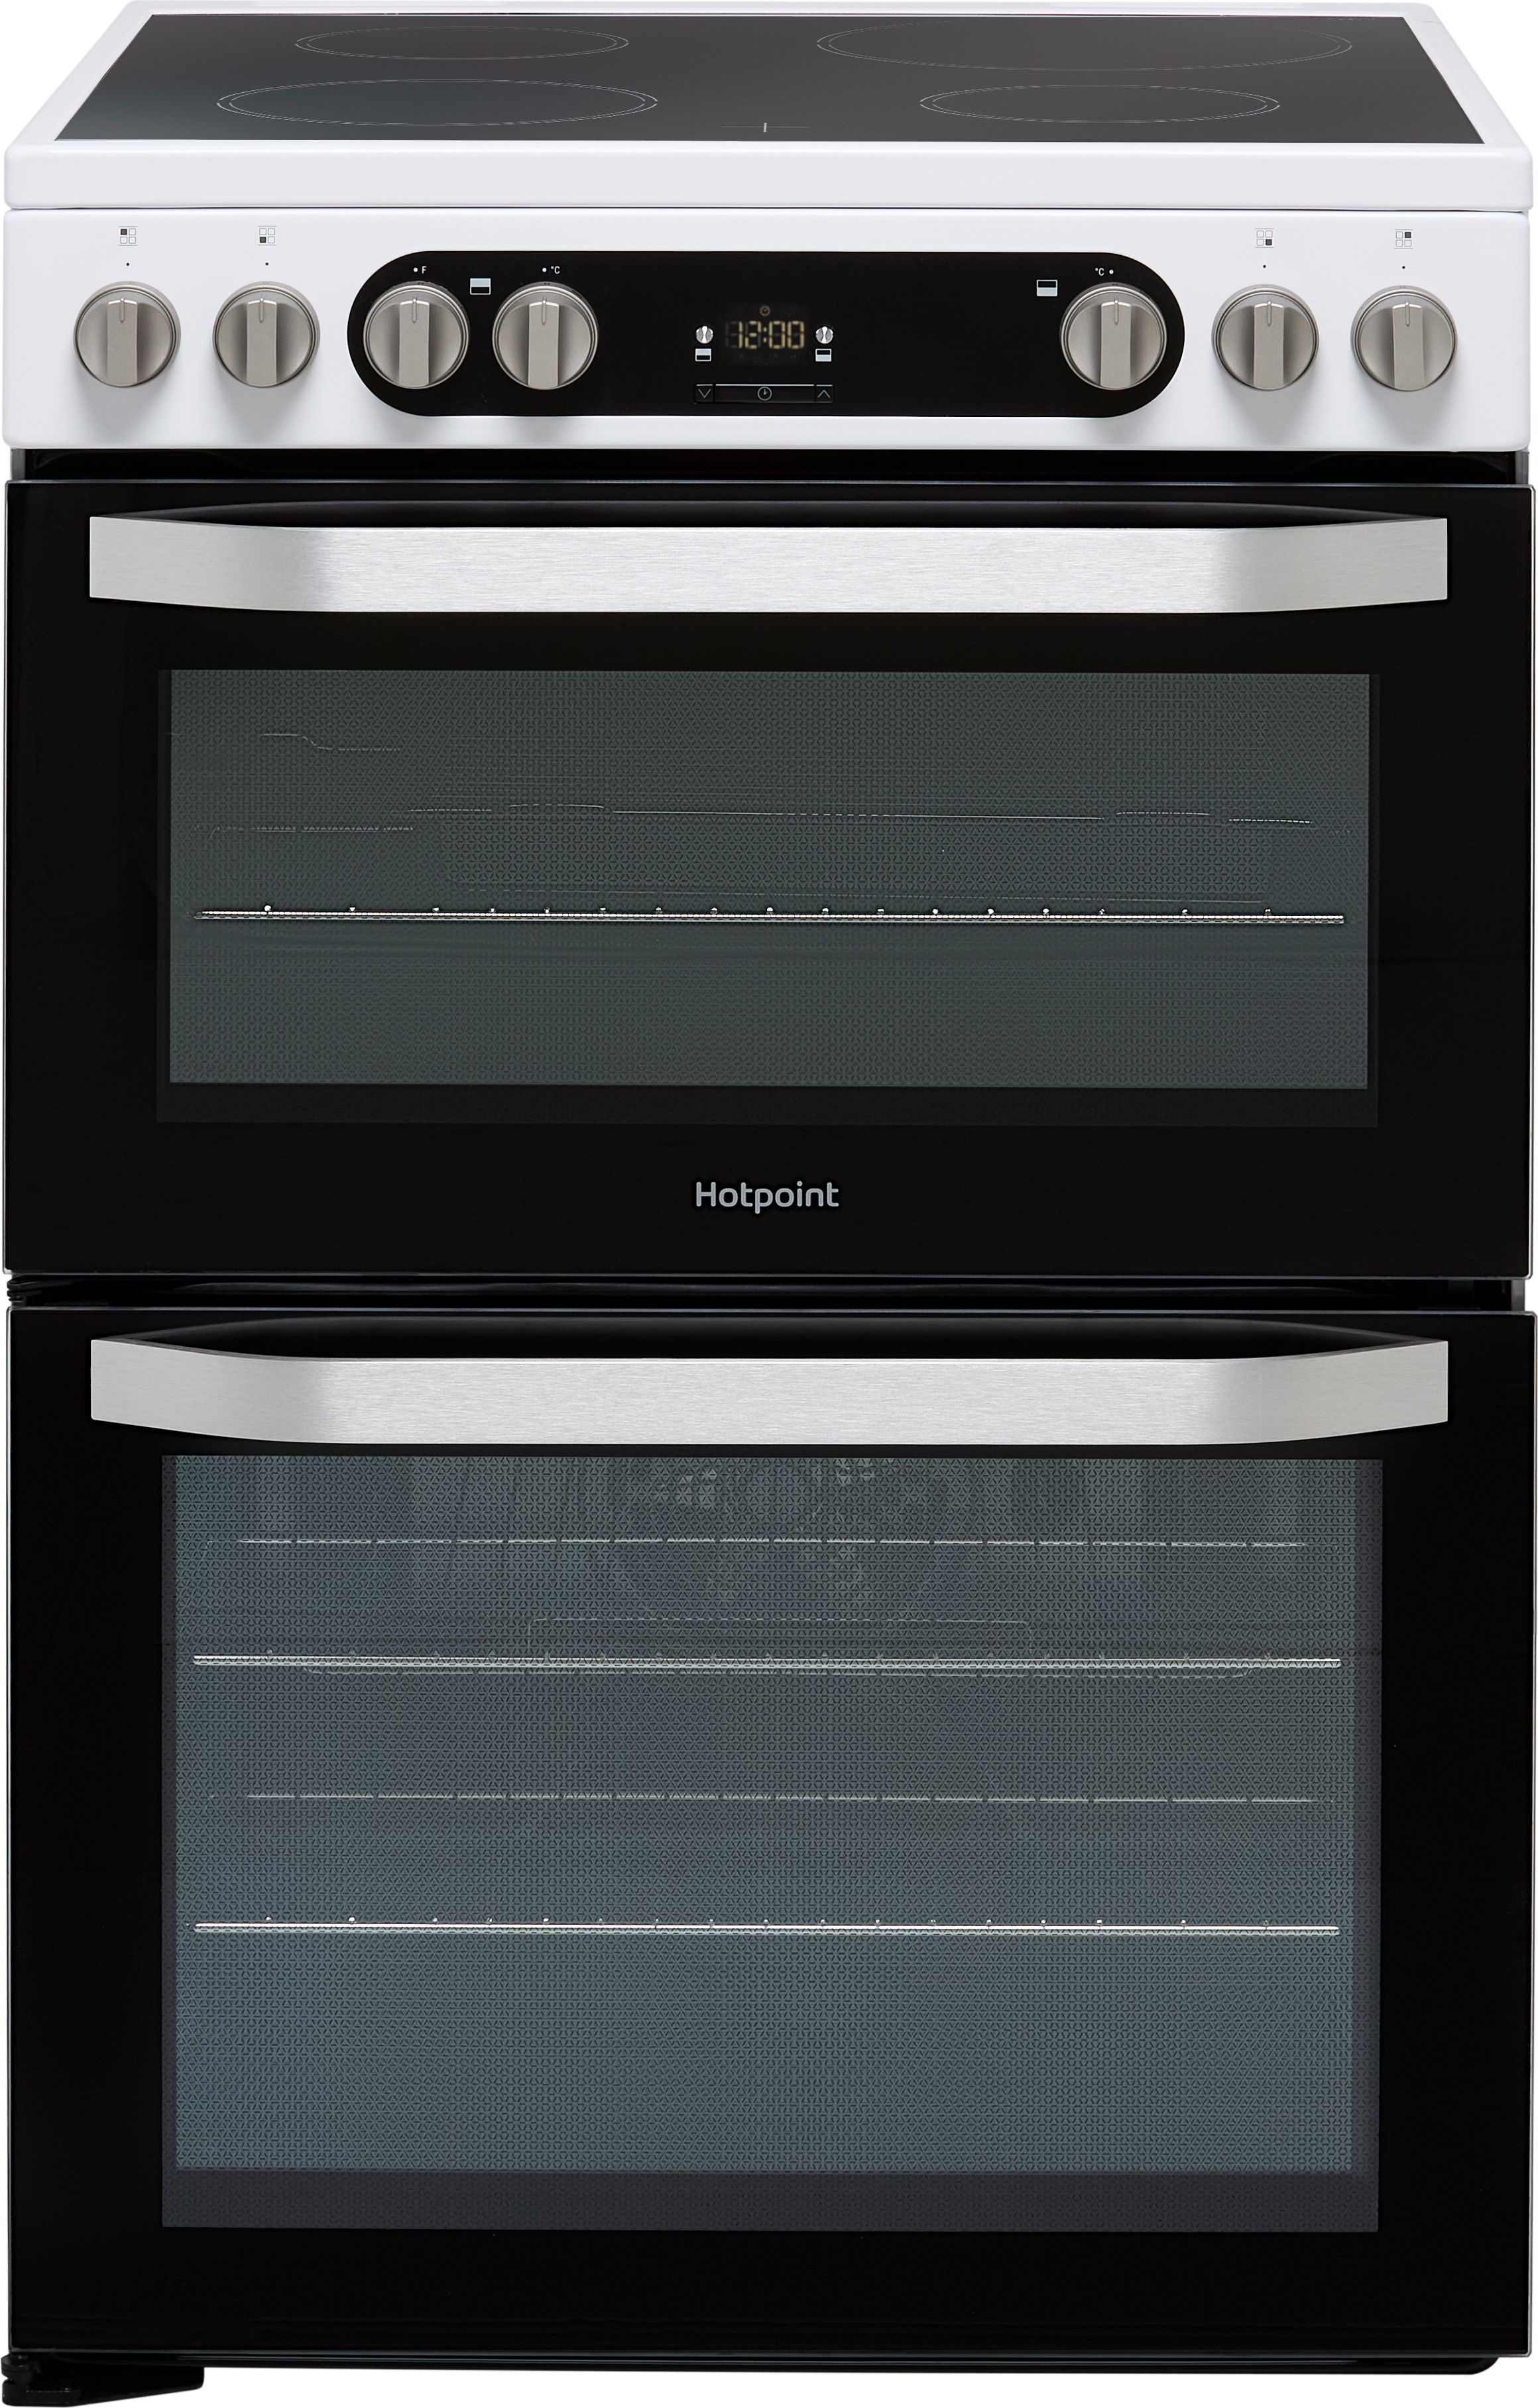 Hotpoint HDM67V9HCW/UK/1 60cm Electric Cooker with Ceramic Hob - White - A/A Rated, White